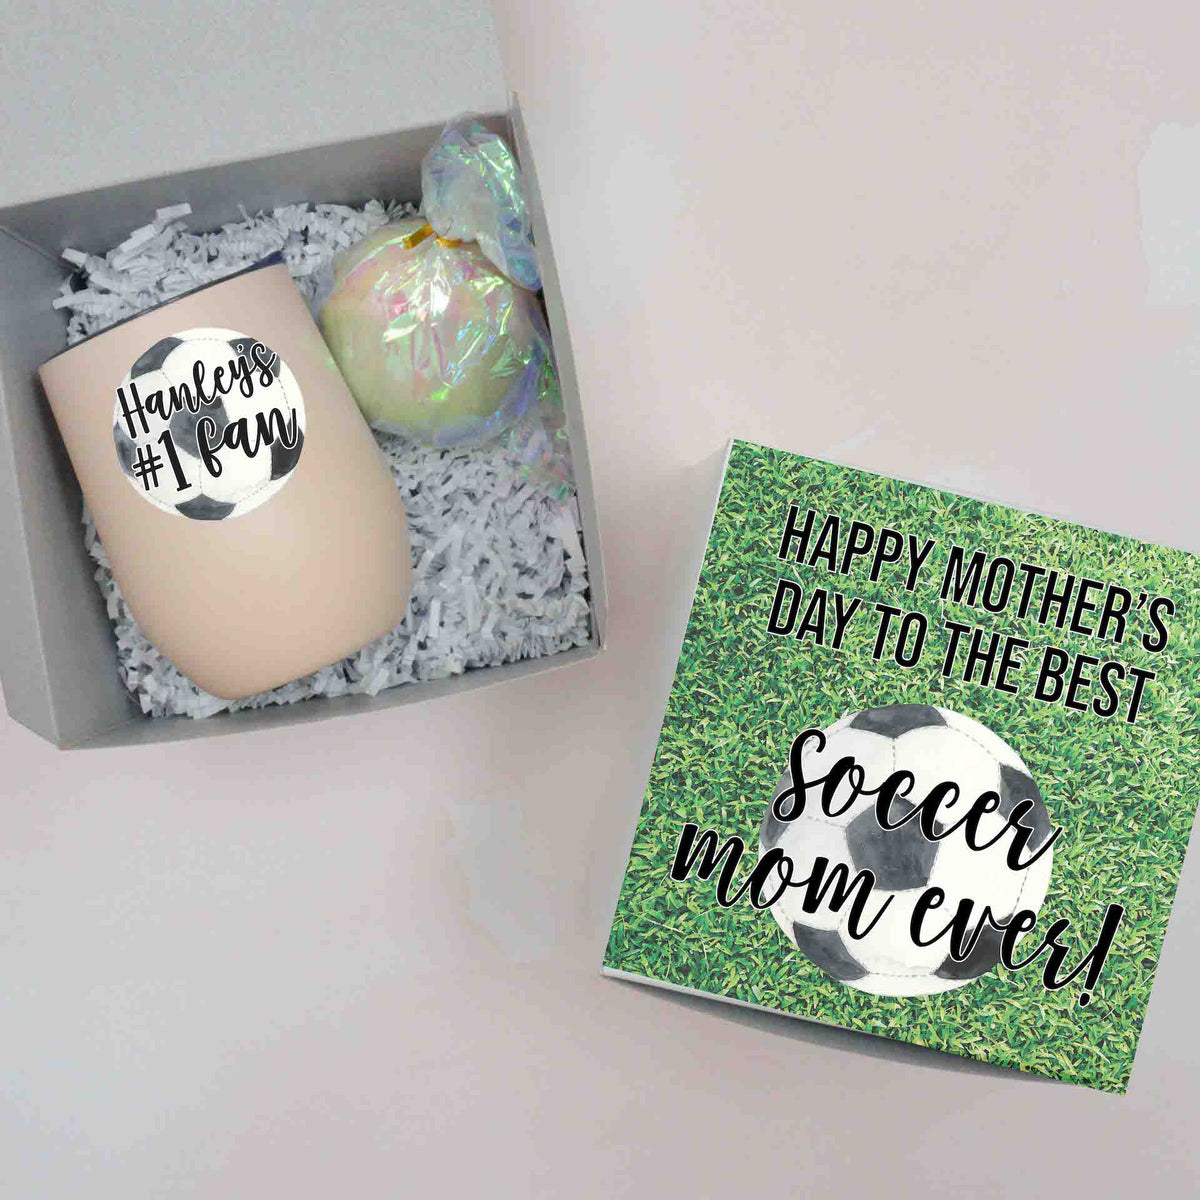 Amazon.com : Mothers Day Gifts from Daughter or Son, Happy Mothers Day Gifts,  Engraved Rock Gifts for Mom, Unique Mother's Day Gift Ideas and Best Mom  Gift with Gift Box and Card. :